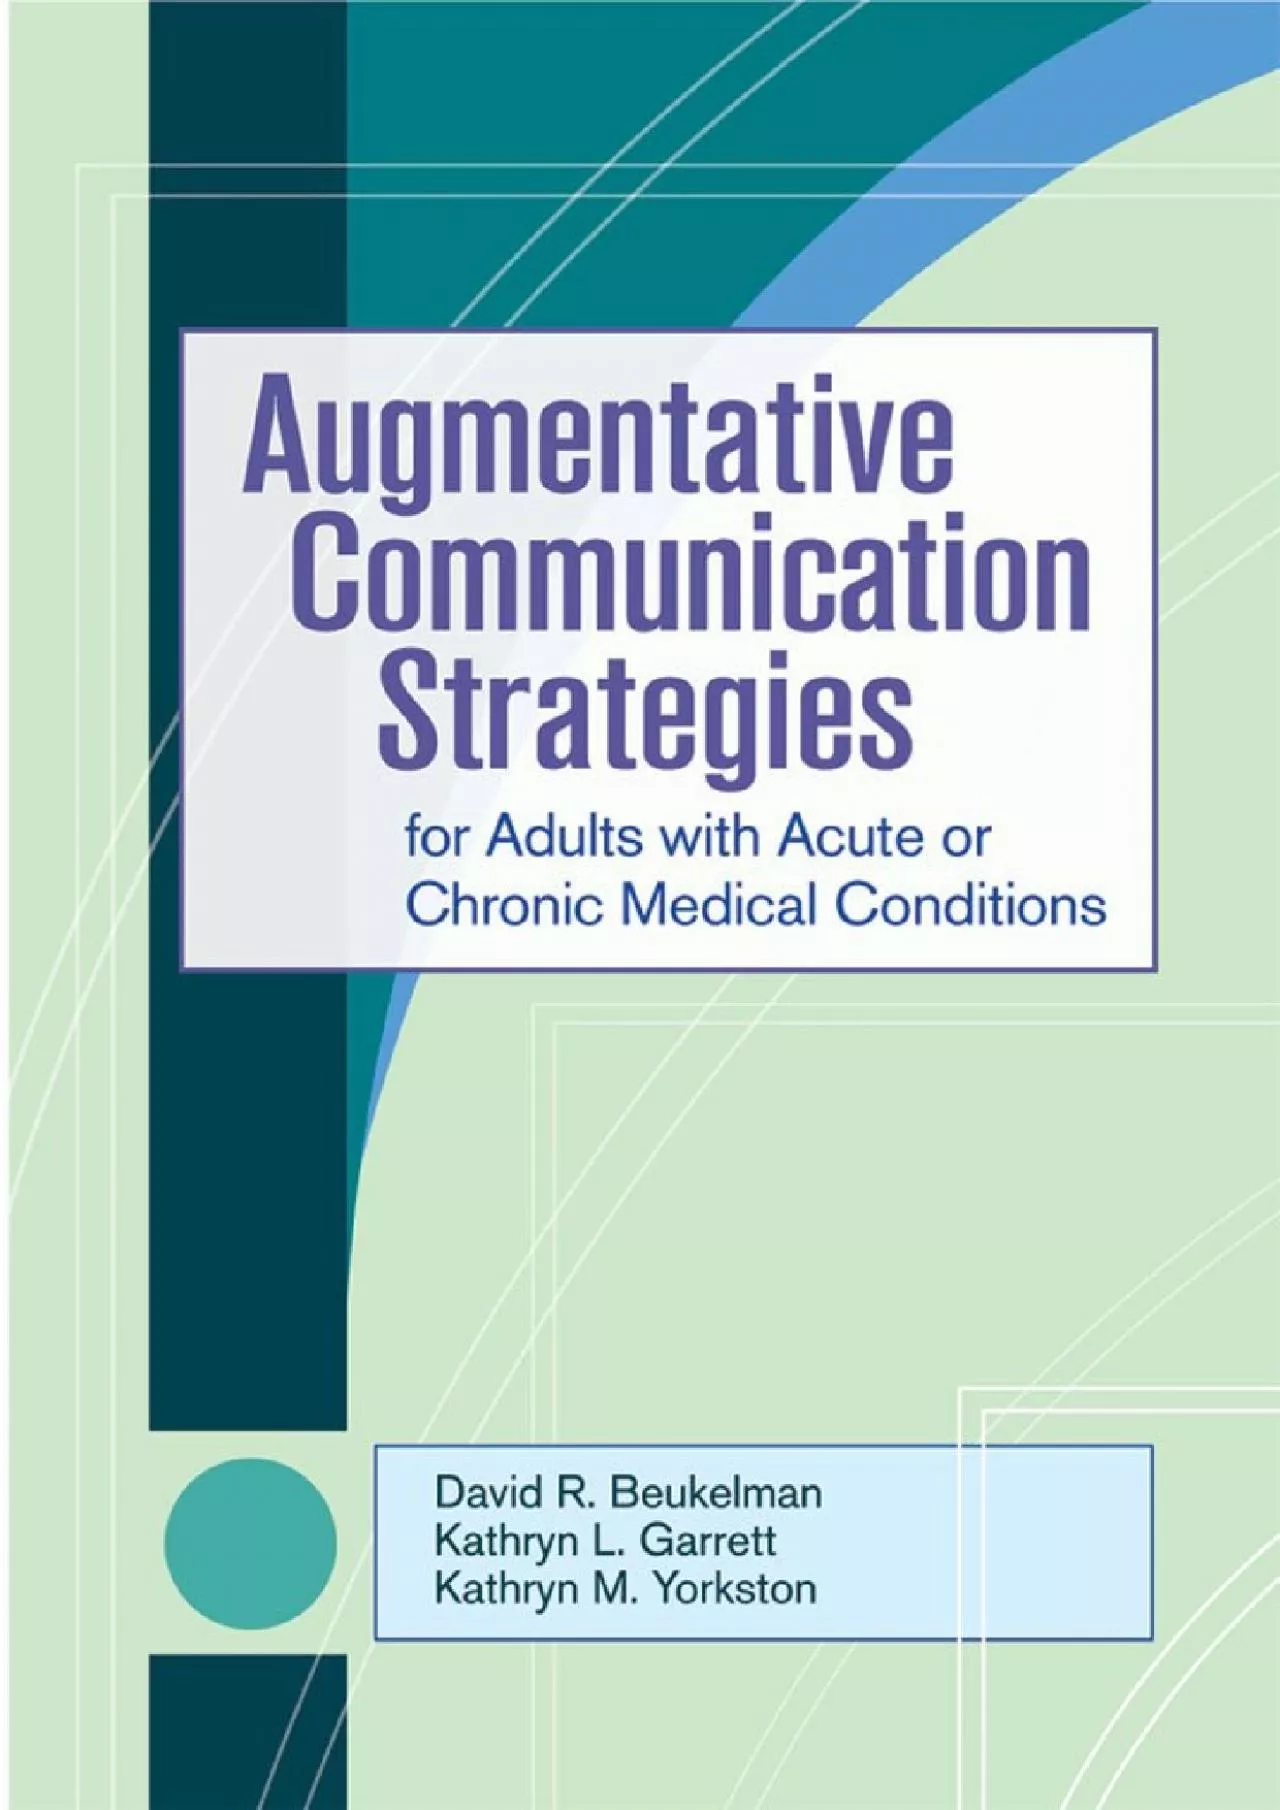 (EBOOK)-Augmentative Communication Strategies for Adults with Acute or Chronic Medical